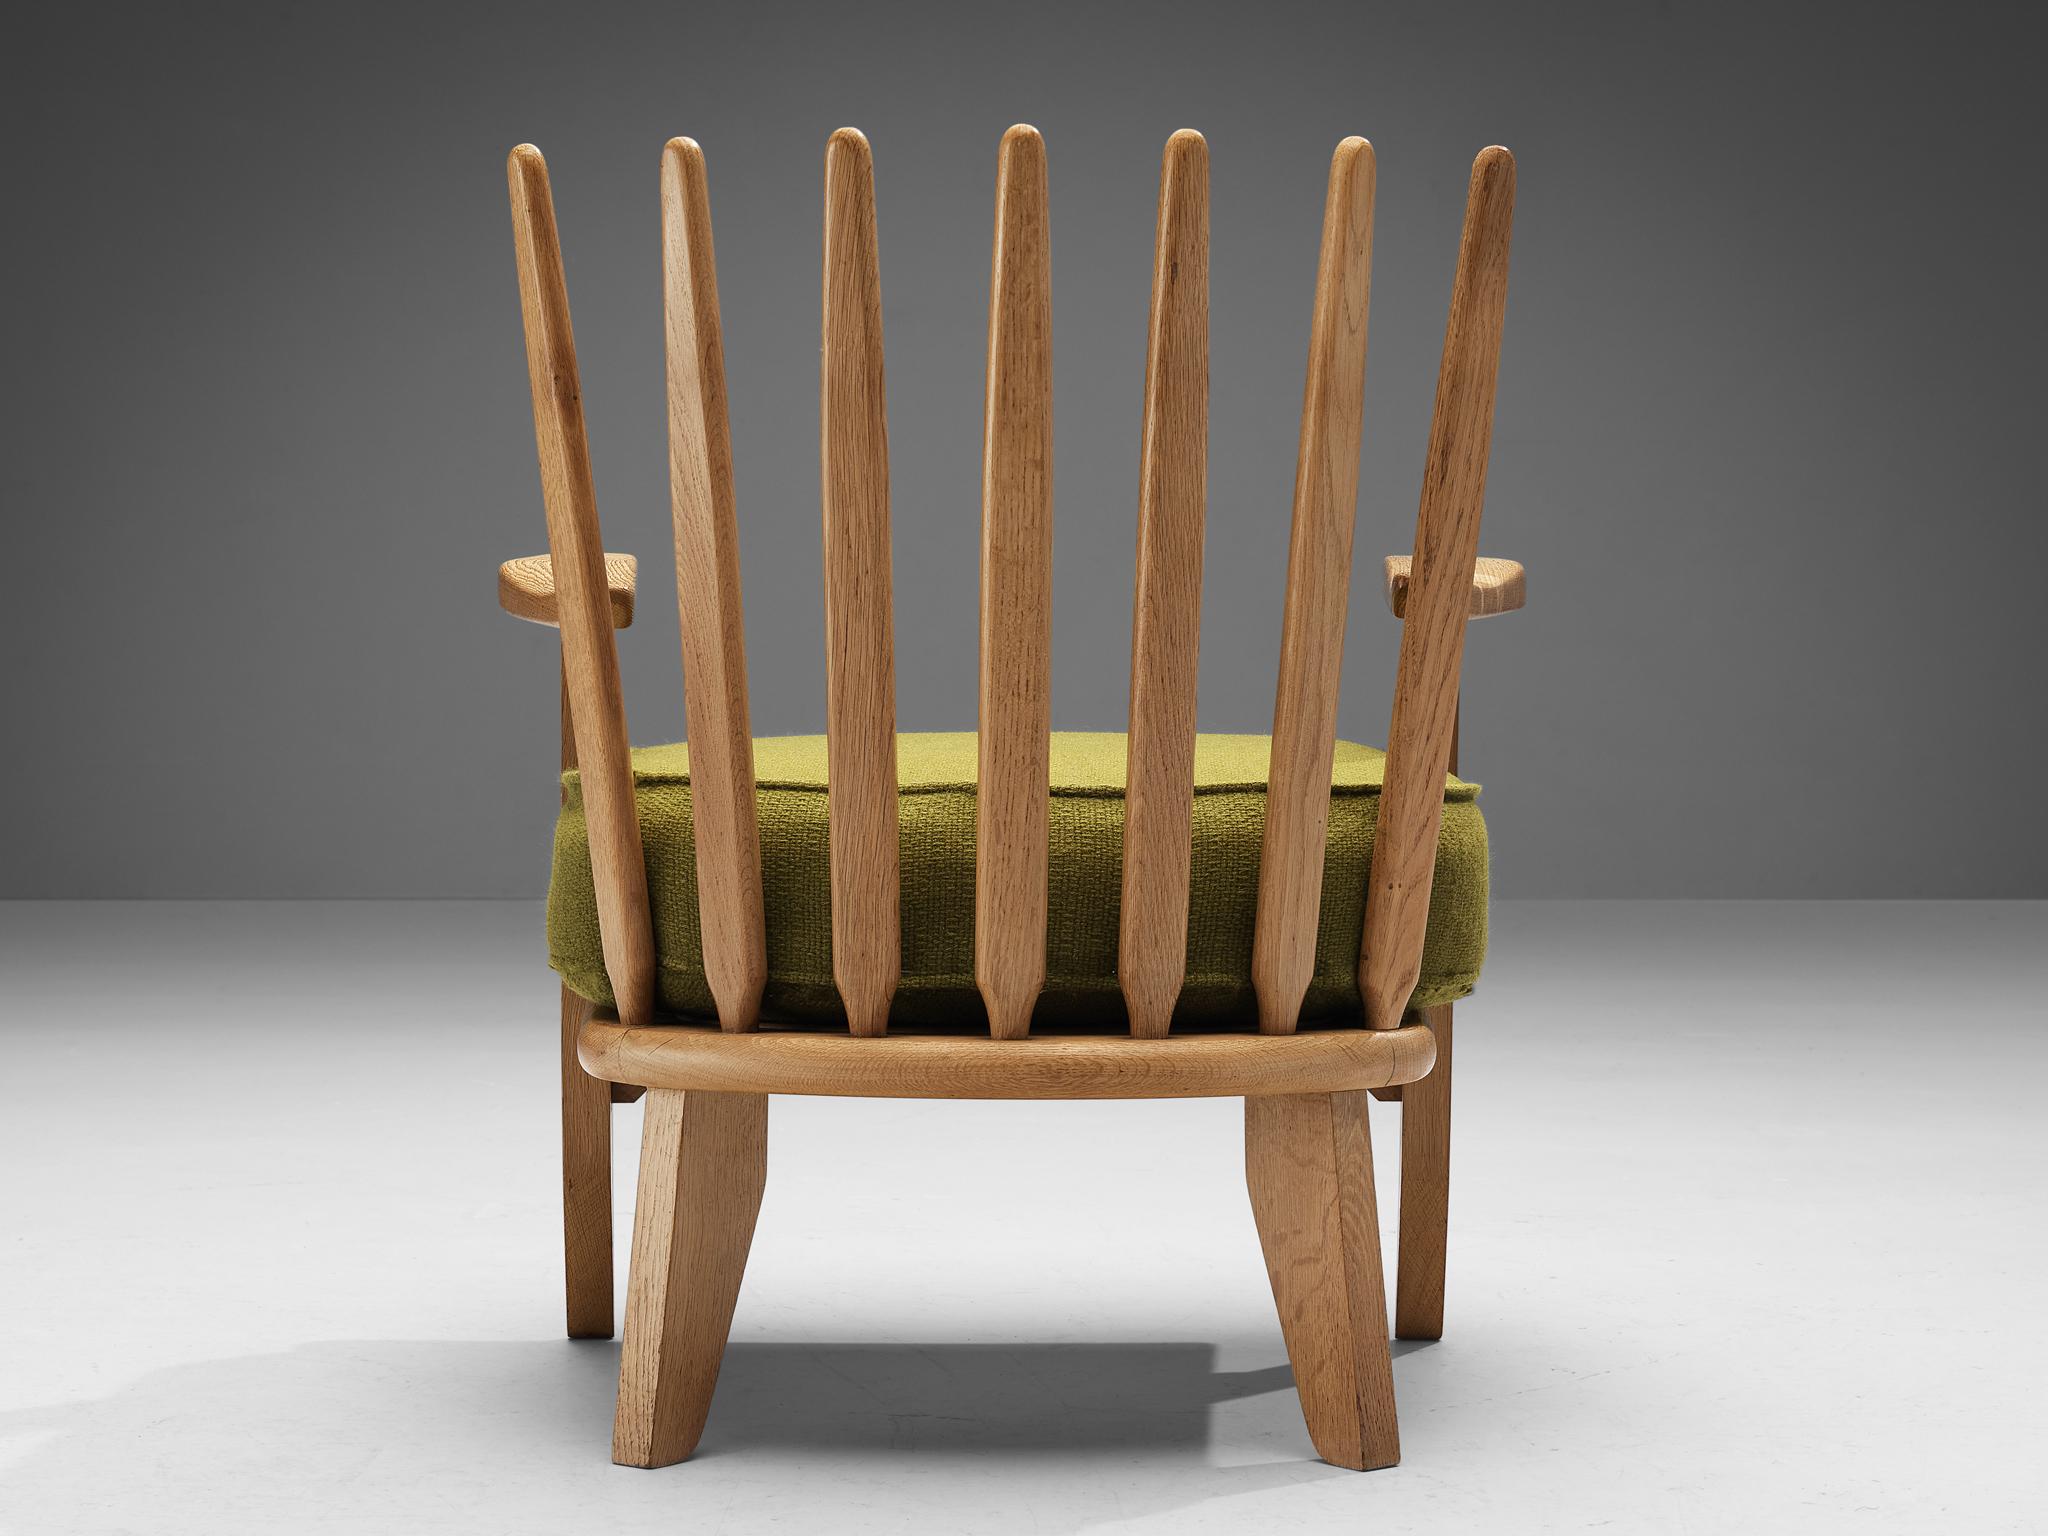 Guillerme et Chambron for Votre Maison, ‘Catherine’ lounge chair, oak, France, 1960s

This sculptural easy chair named ‘Catherine’ is designed by Guillerme et Chambron. They are known for their high quality solid oak furniture of which this is no